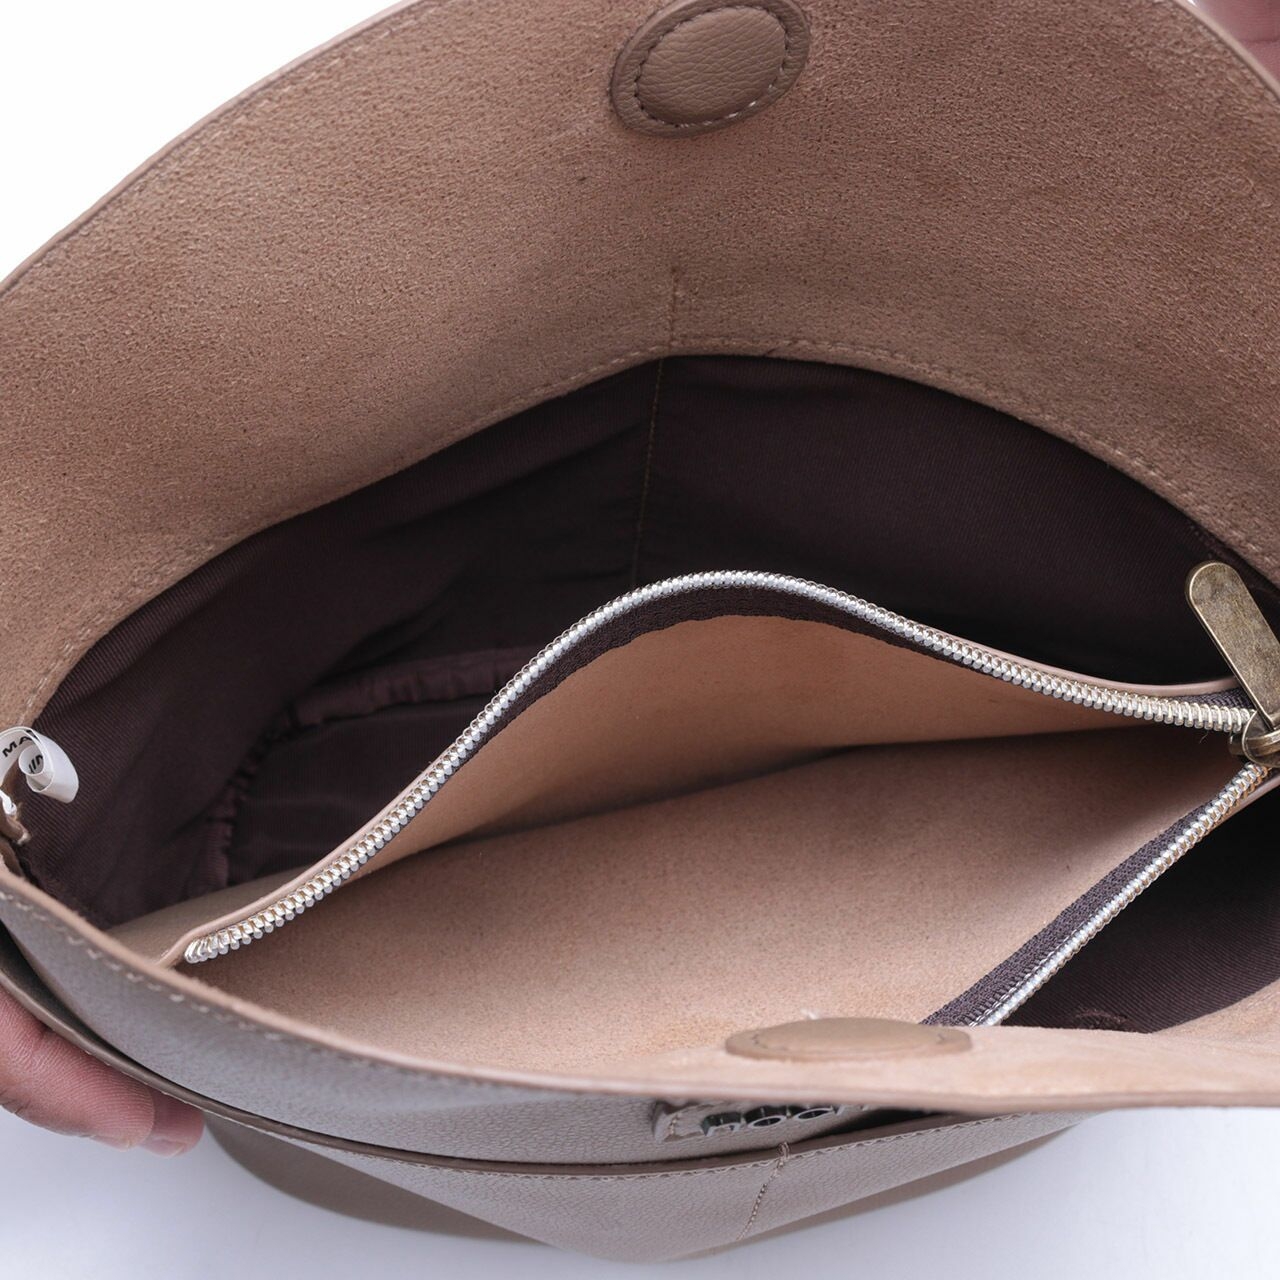 Noche Taupe Leather Sling Bag